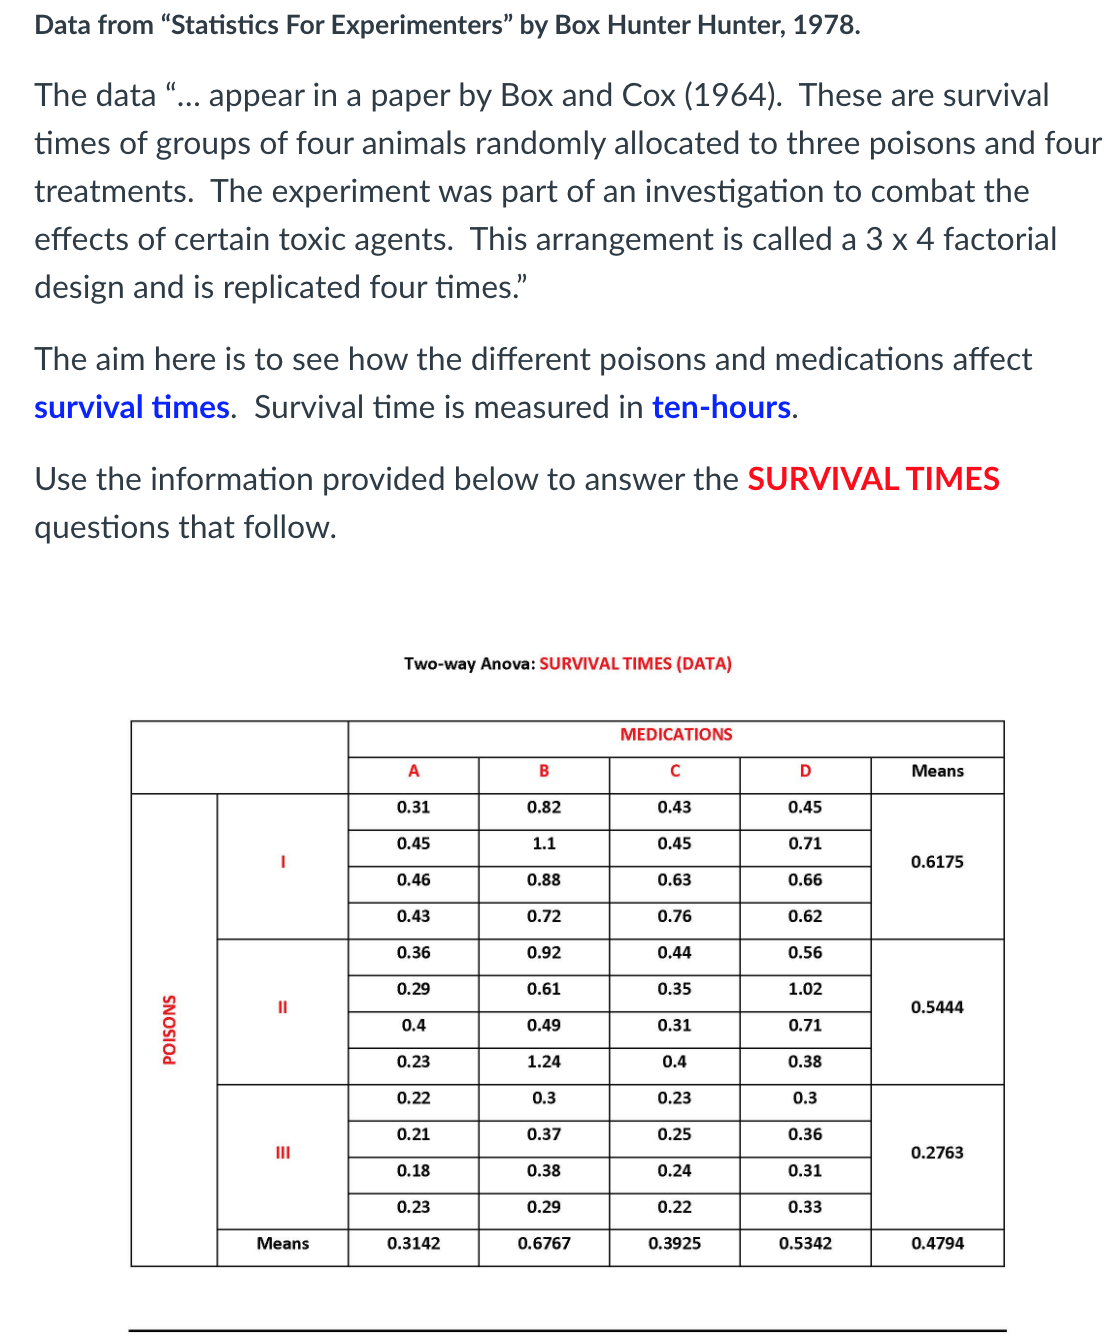 Data from "Statistics For Experimenters" by Box Hunter Hunter, 1978.
The data “... appear in a paper by Box and Cox (1964). These are survival
times of groups of four animals randomly allocated to three poisons and four
treatments. The experiment was part of an investigation to combat the
effects of certain toxic agents. This arrangement is called a 3 x 4 factorial
design and is replicated four times."
The aim here is to see how the different poisons and medications affect
survival times. Survival time is measured in ten-hours.
Use the information provided below to answer the SURVIVAL TIMES
questions that follow.
Two-way Anova: SURVIVAL TIMES (DATA)
MEDICATIONS
D
Means
0.31
0.82
0.43
0.45
0.45
1.1
0.45
0.71
0.6175
0.46
0.88
0.63
0.66
0.43
0.72
0.76
0.62
0.36
0.92
0.44
0.56
0.29
0.61
0.35
1.02
II
0.5444
0.4
0.49
0.31
0.71
0.23
1.24
0.4
0.38
0.22
0.3
0.23
0.3
0.21
0.37
0.25
0.36
II
0.2763
0.18
0.38
0.24
0.31
0.23
0.29
0.22
0.33
Means
0.3142
0.6767
0.3925
0.5342
0.4794
SNOSIOD
